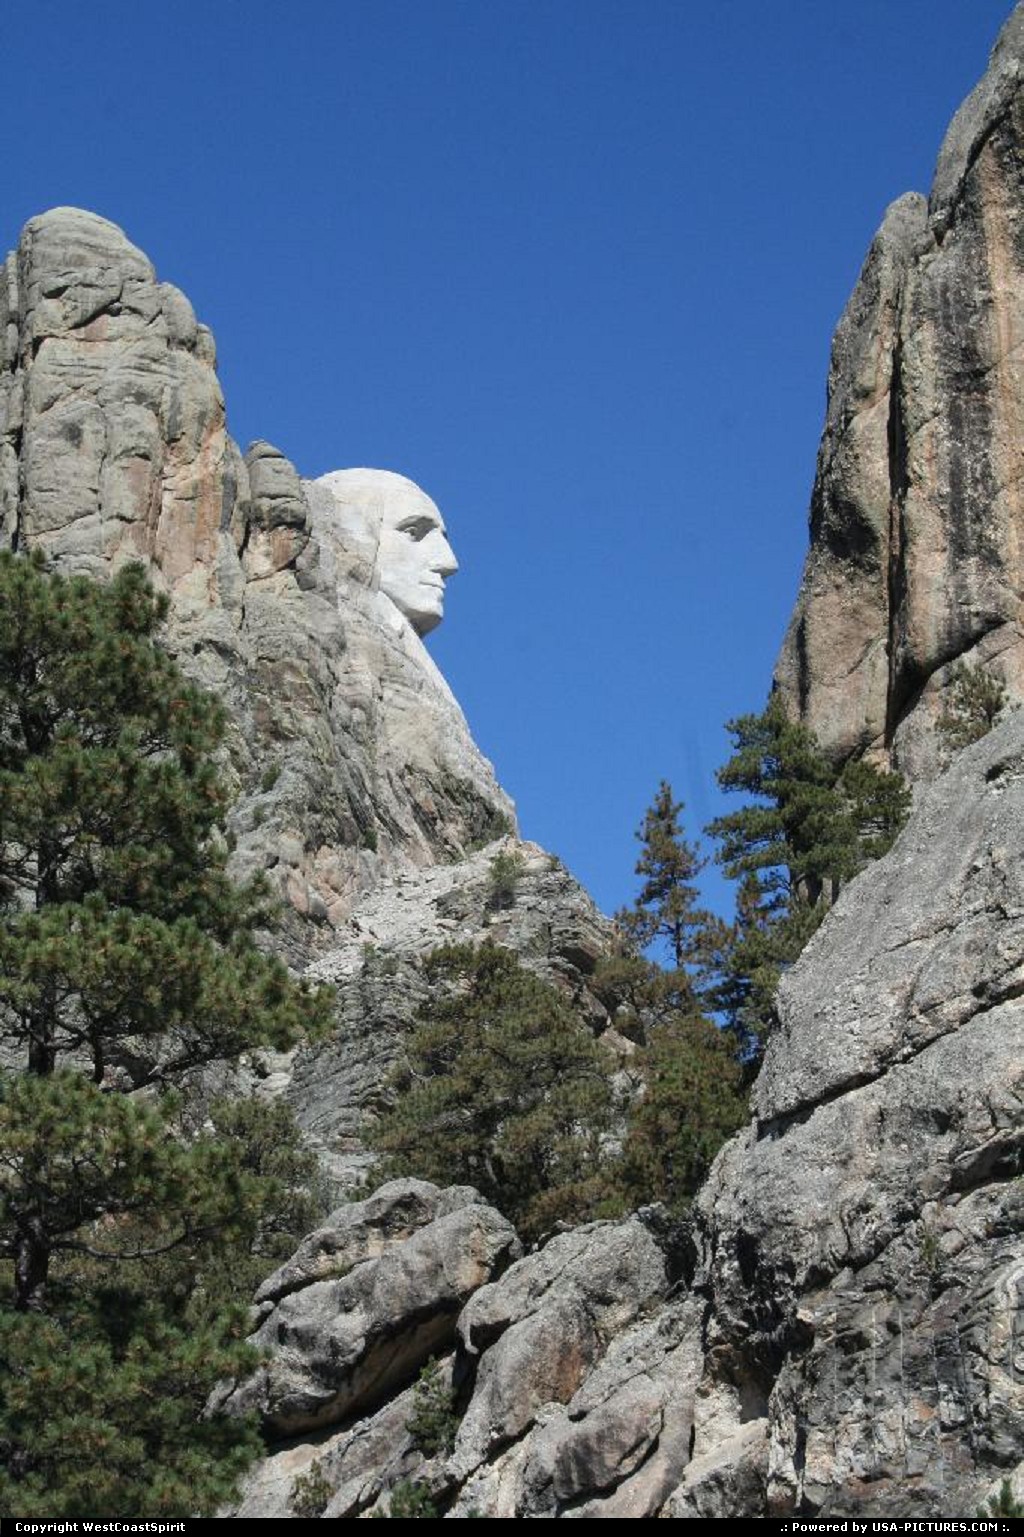 Picture by WestCoastSpirit: Not in a city South-dakota   mount rushmore, black hills, profile